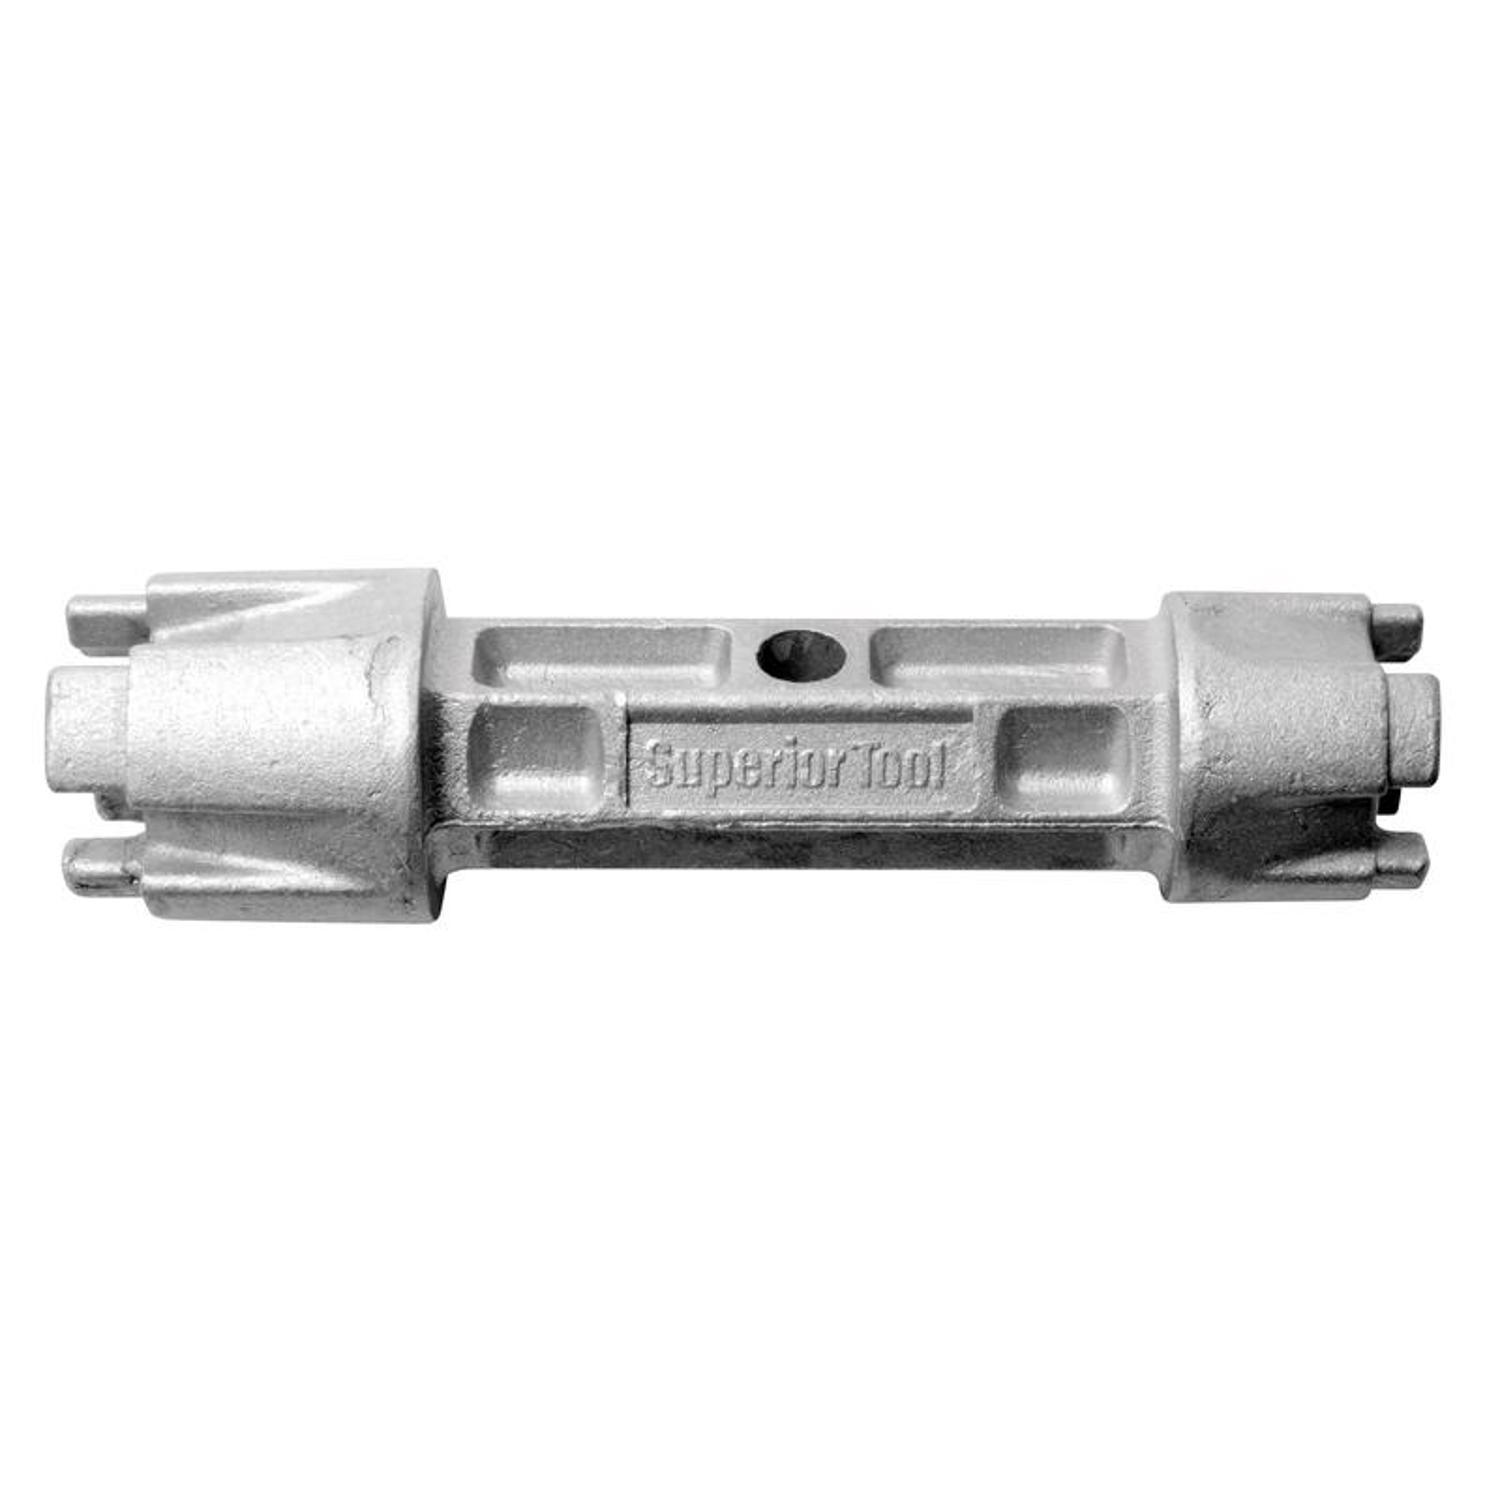 Superior Tool 05255 1.5 Tub Drain Extractor-Removes One and a Half Inch  Old or Stubborn Tub Drains